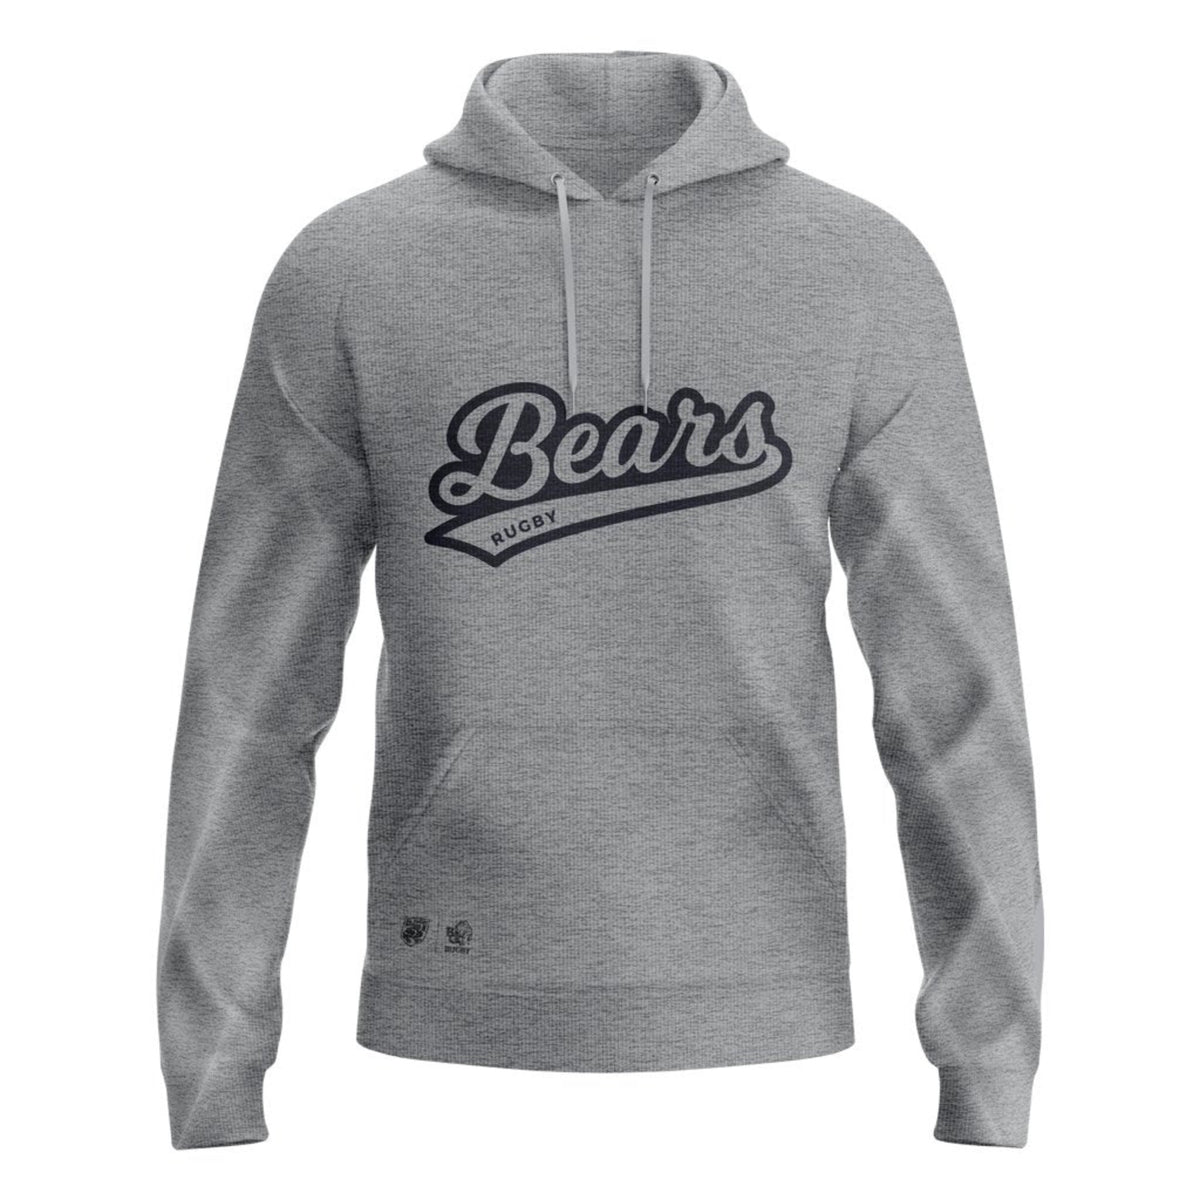 BC Rugby 2021 &quot;Bears&quot; Hoodie - Youth Unisex - www.therugbyshop.com www.therugbyshop.com YOUTH / GREY / S XIX Brands HOODIES BC Rugby 2021 &quot;Bears&quot; Hoodie - Youth Unisex